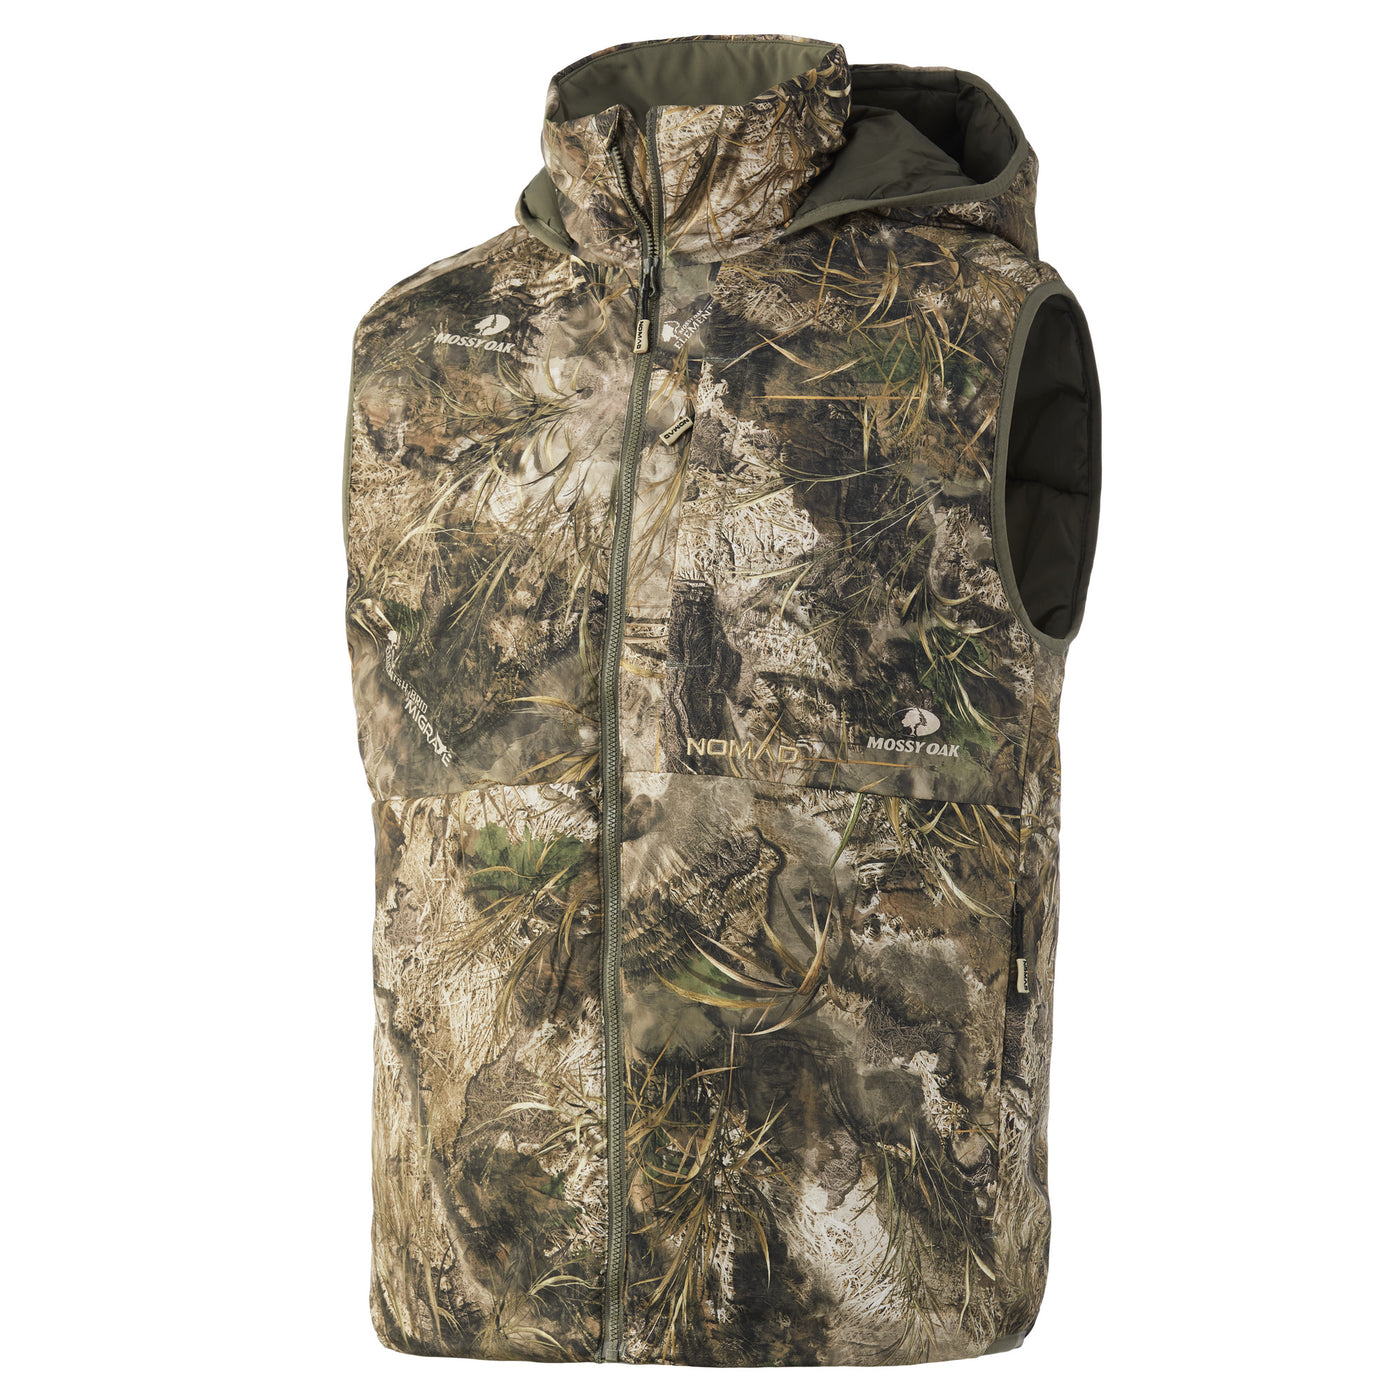 Nomad PMD Camo Hooded Vest